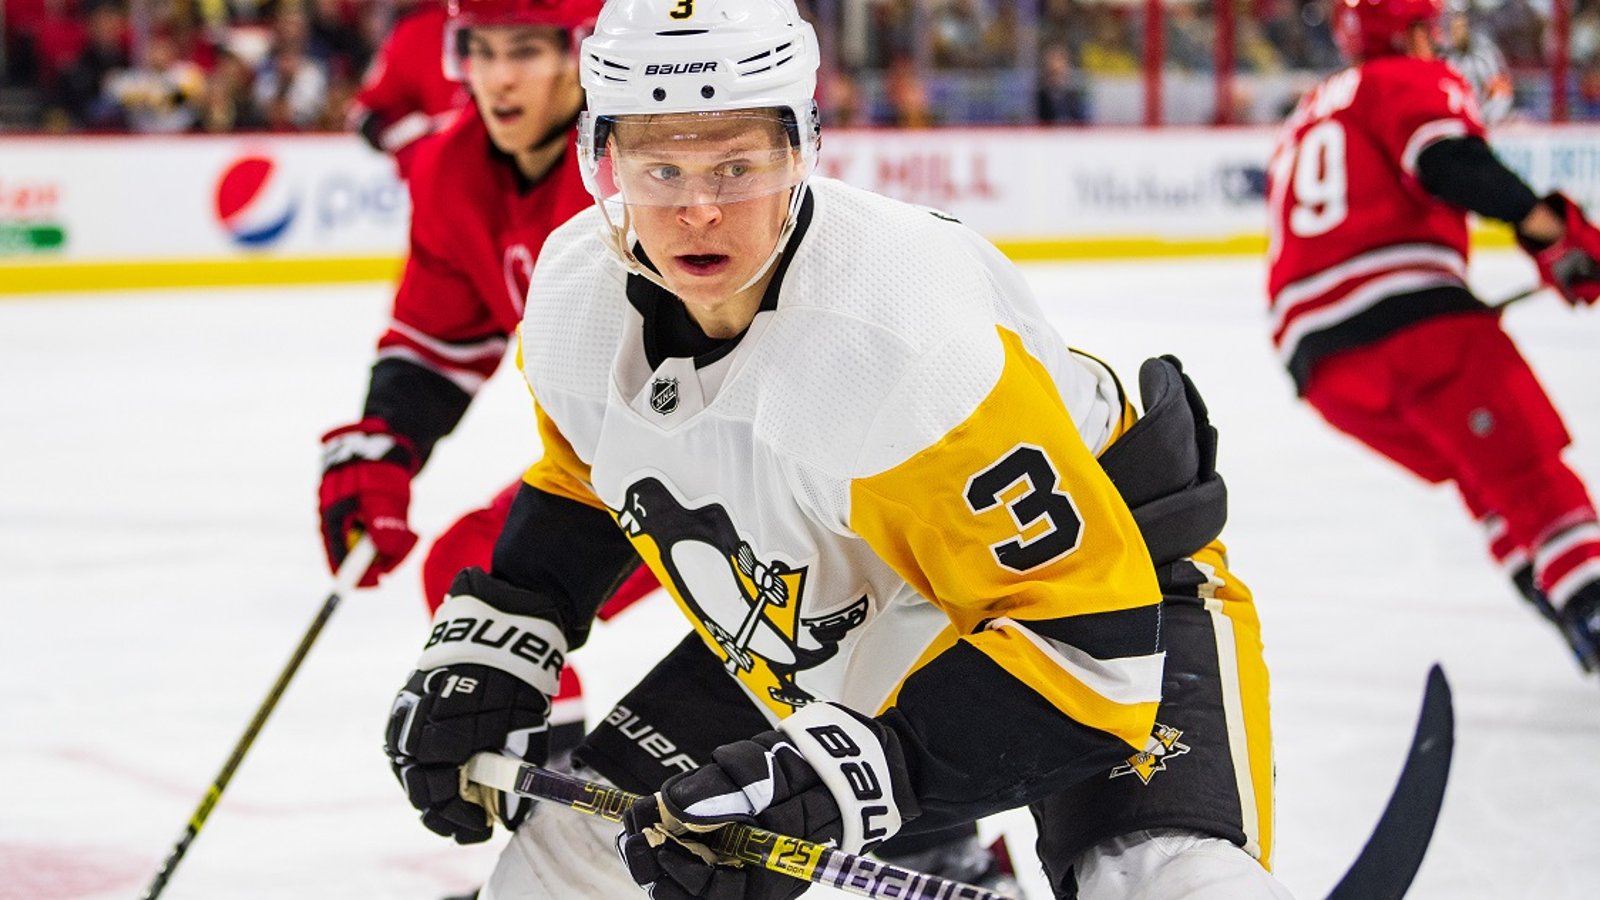 Olli Maatta comments for the first time since being traded.